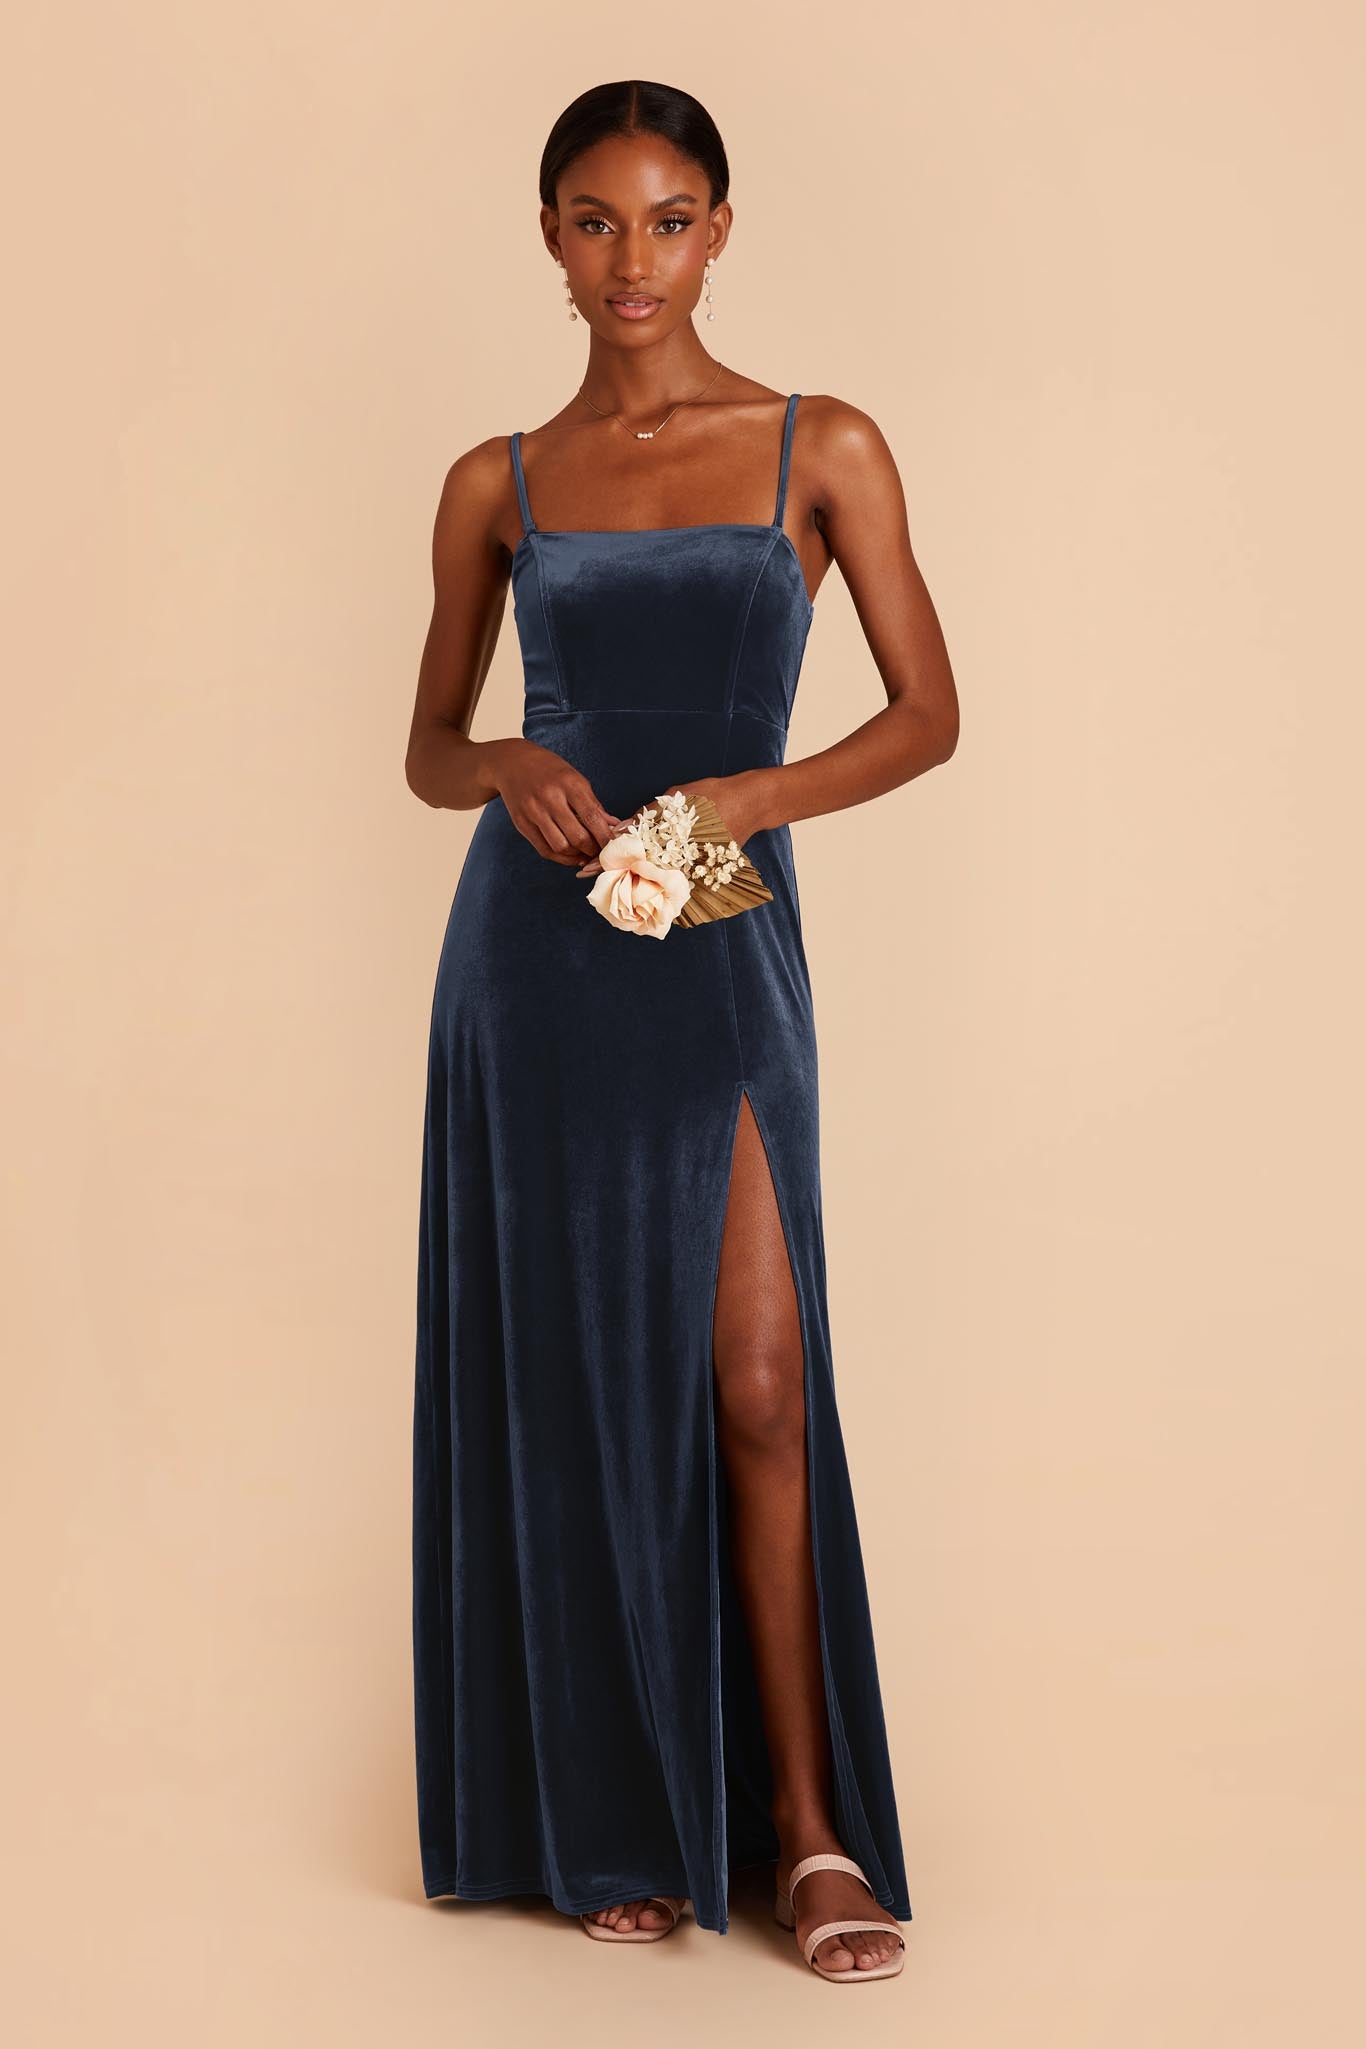 Velvet Dresses, Jumpsuits and Formal Gowns